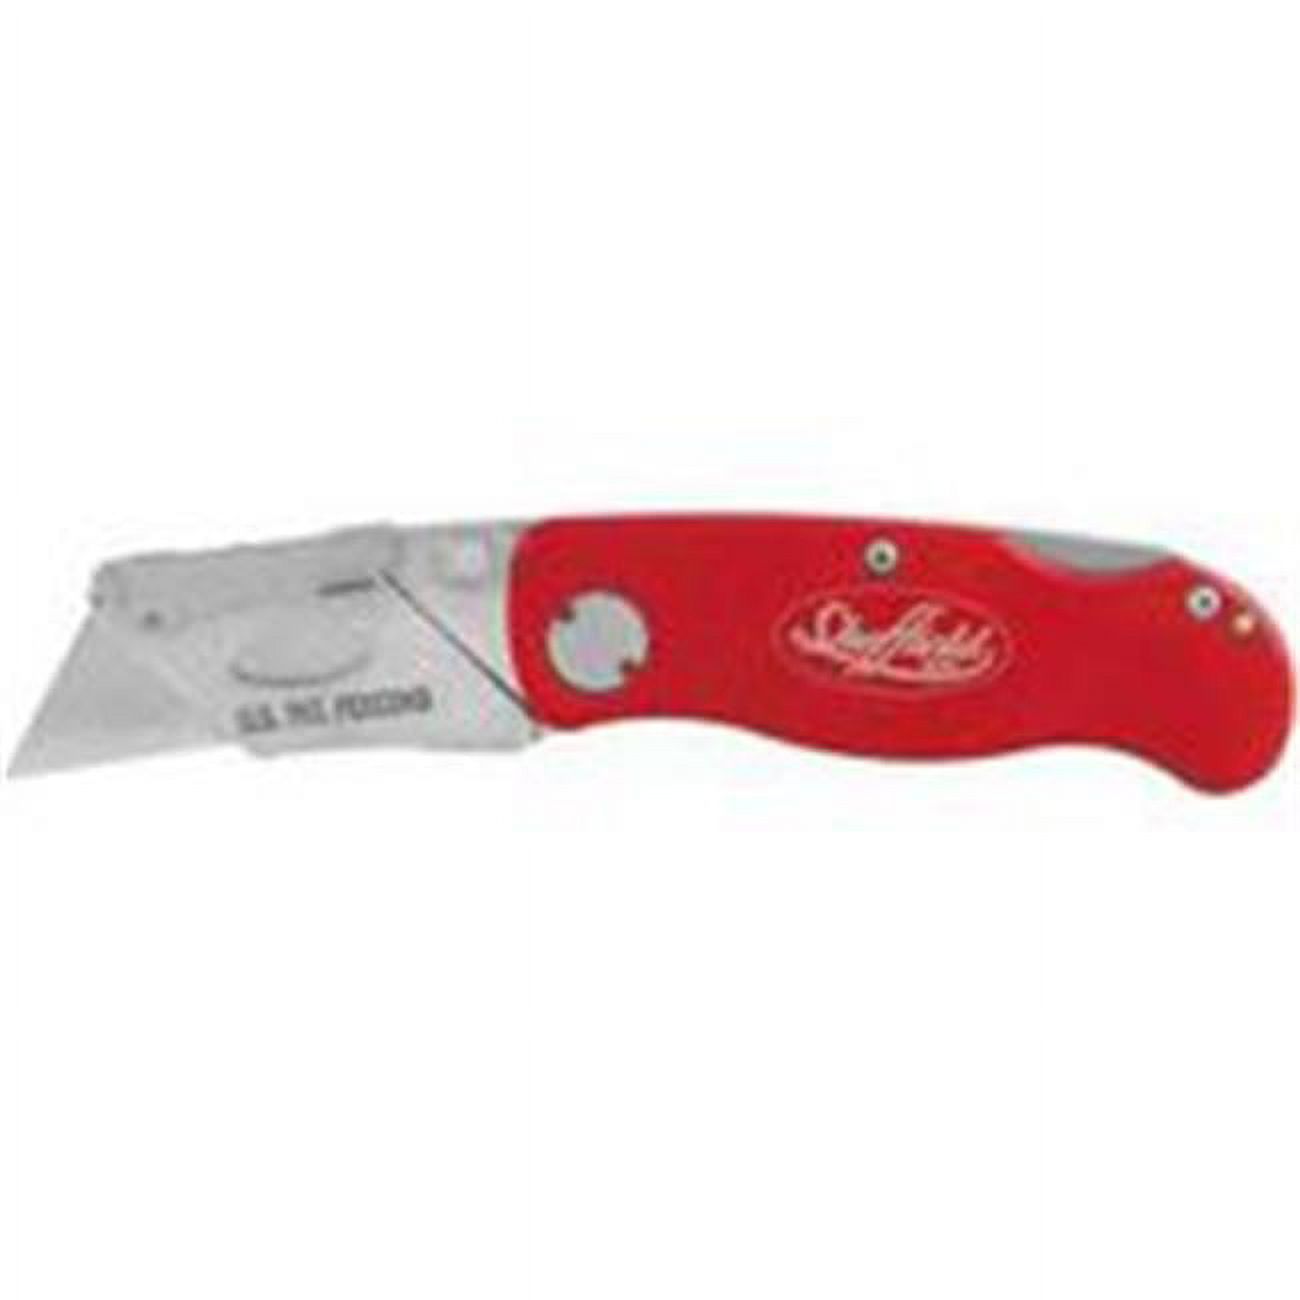 Sheffield Ultimate Utility Folder 2.5 in Blade Red Aluminum - image 1 of 3